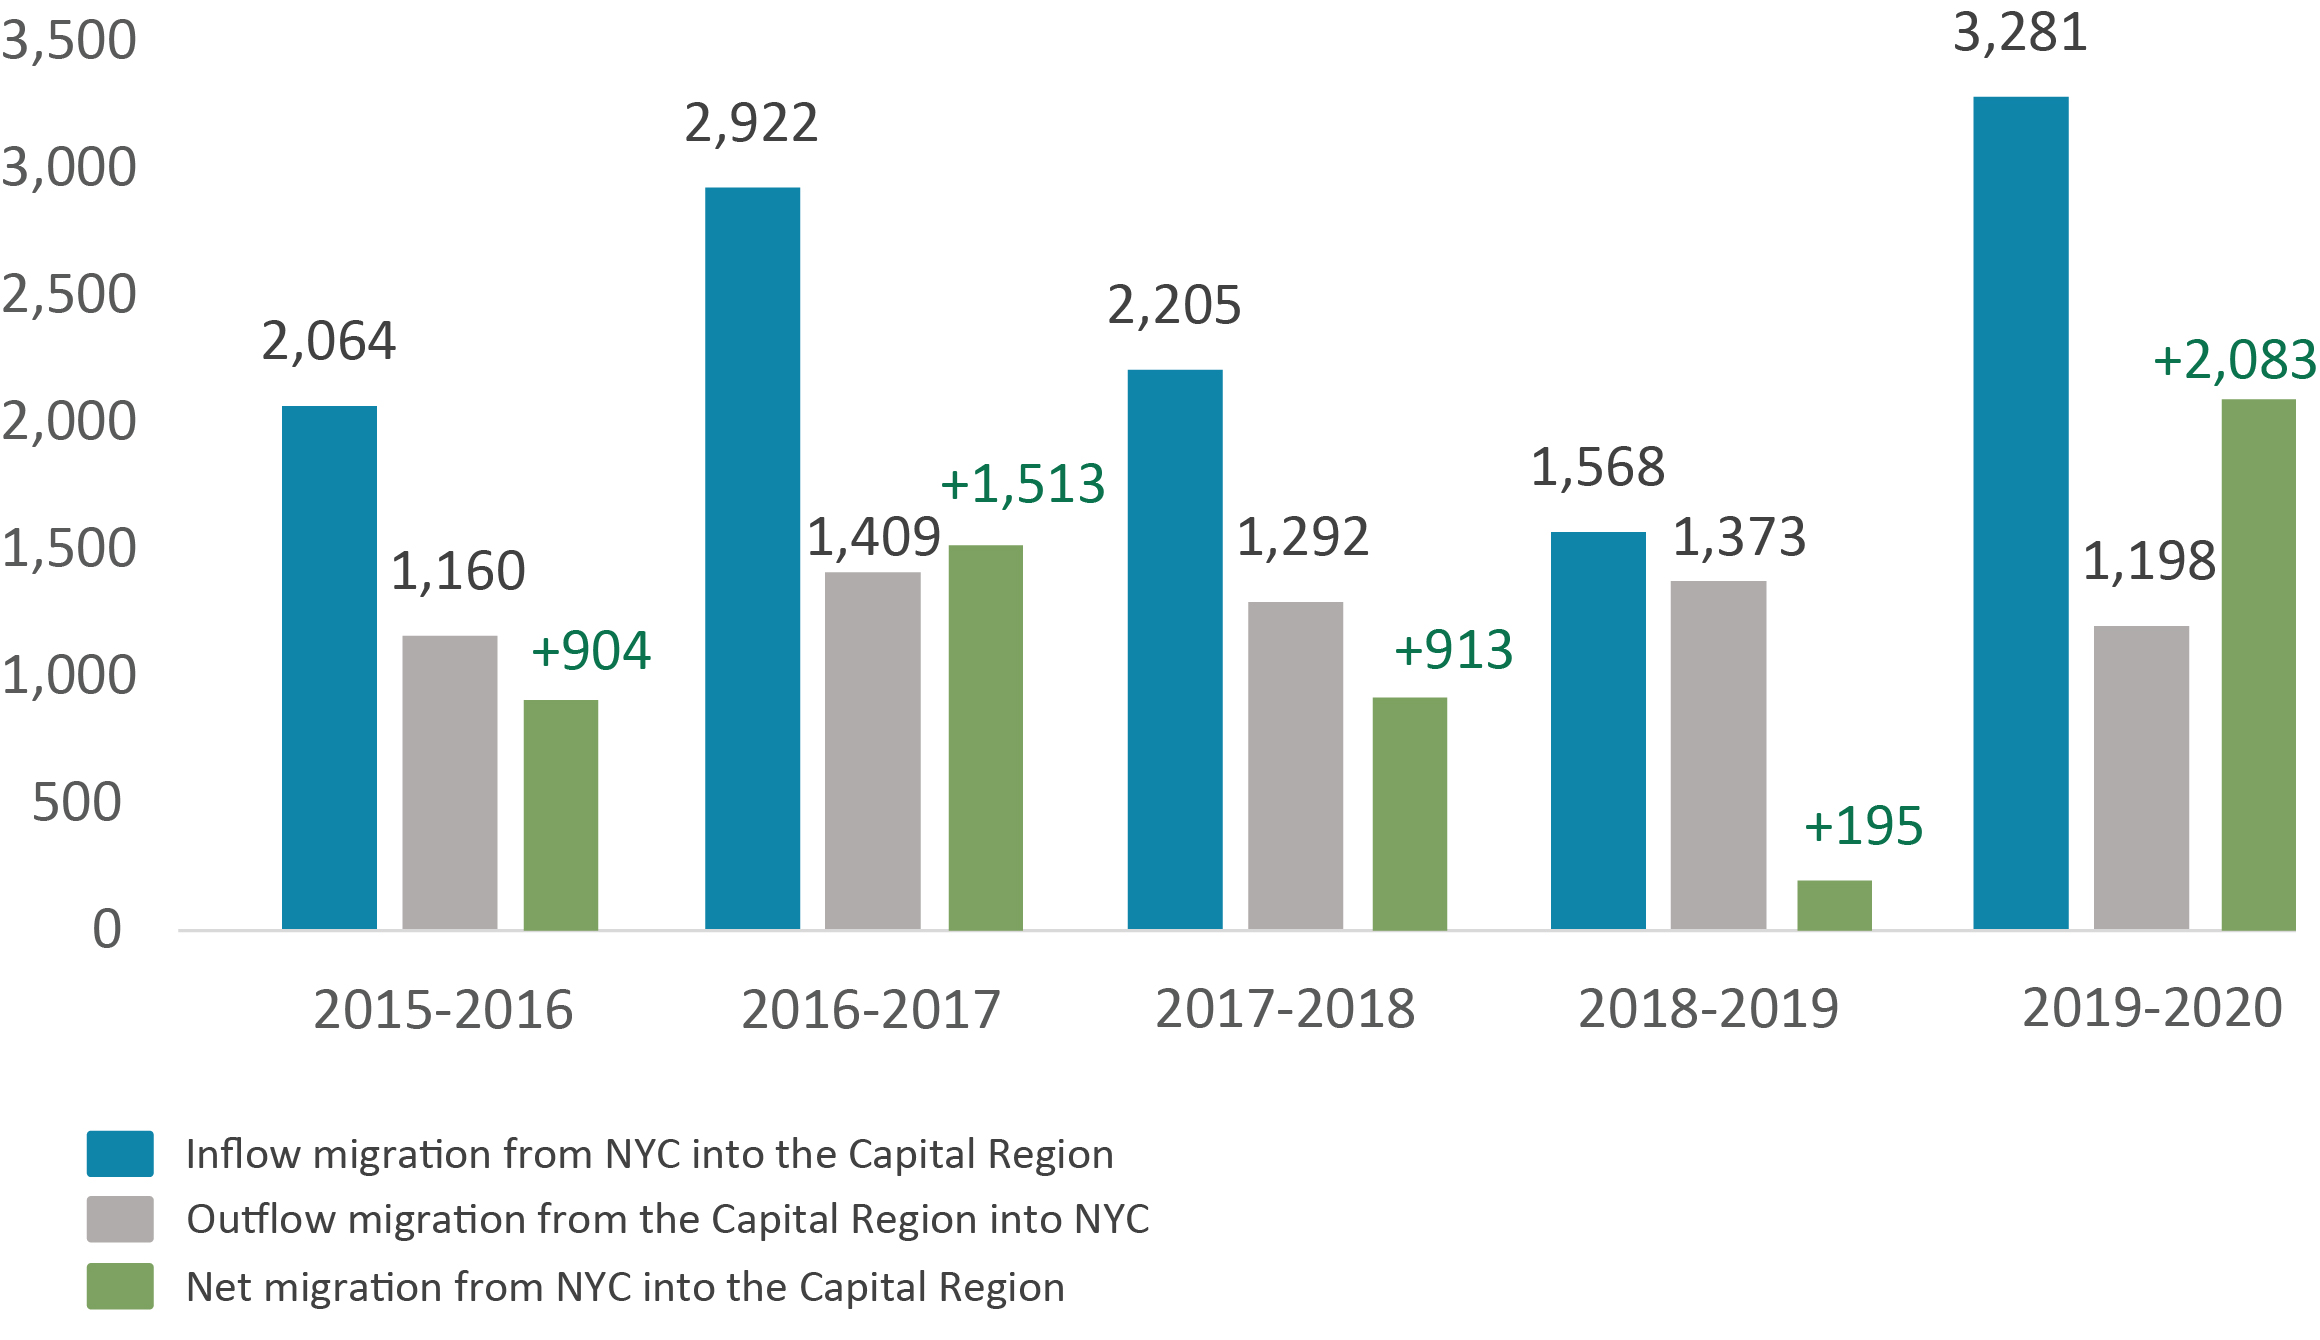 Capital Region kept attracting the NYC residents - IRS shows